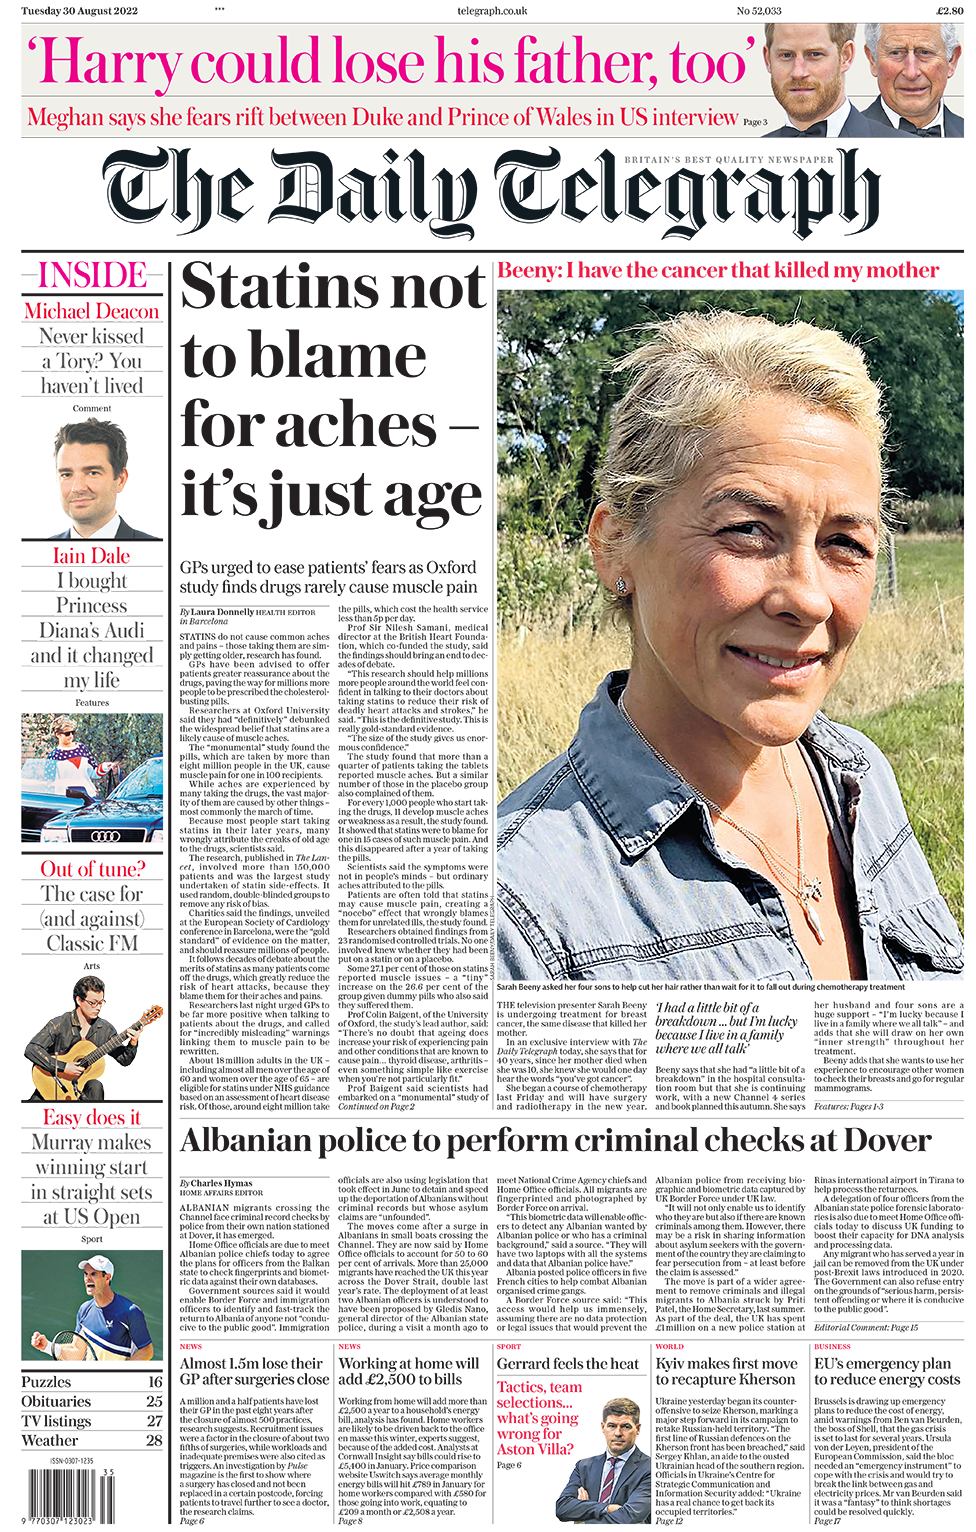 The headline in the Daily Telegraph reads 'Statins not to blame for arches - it's just age'